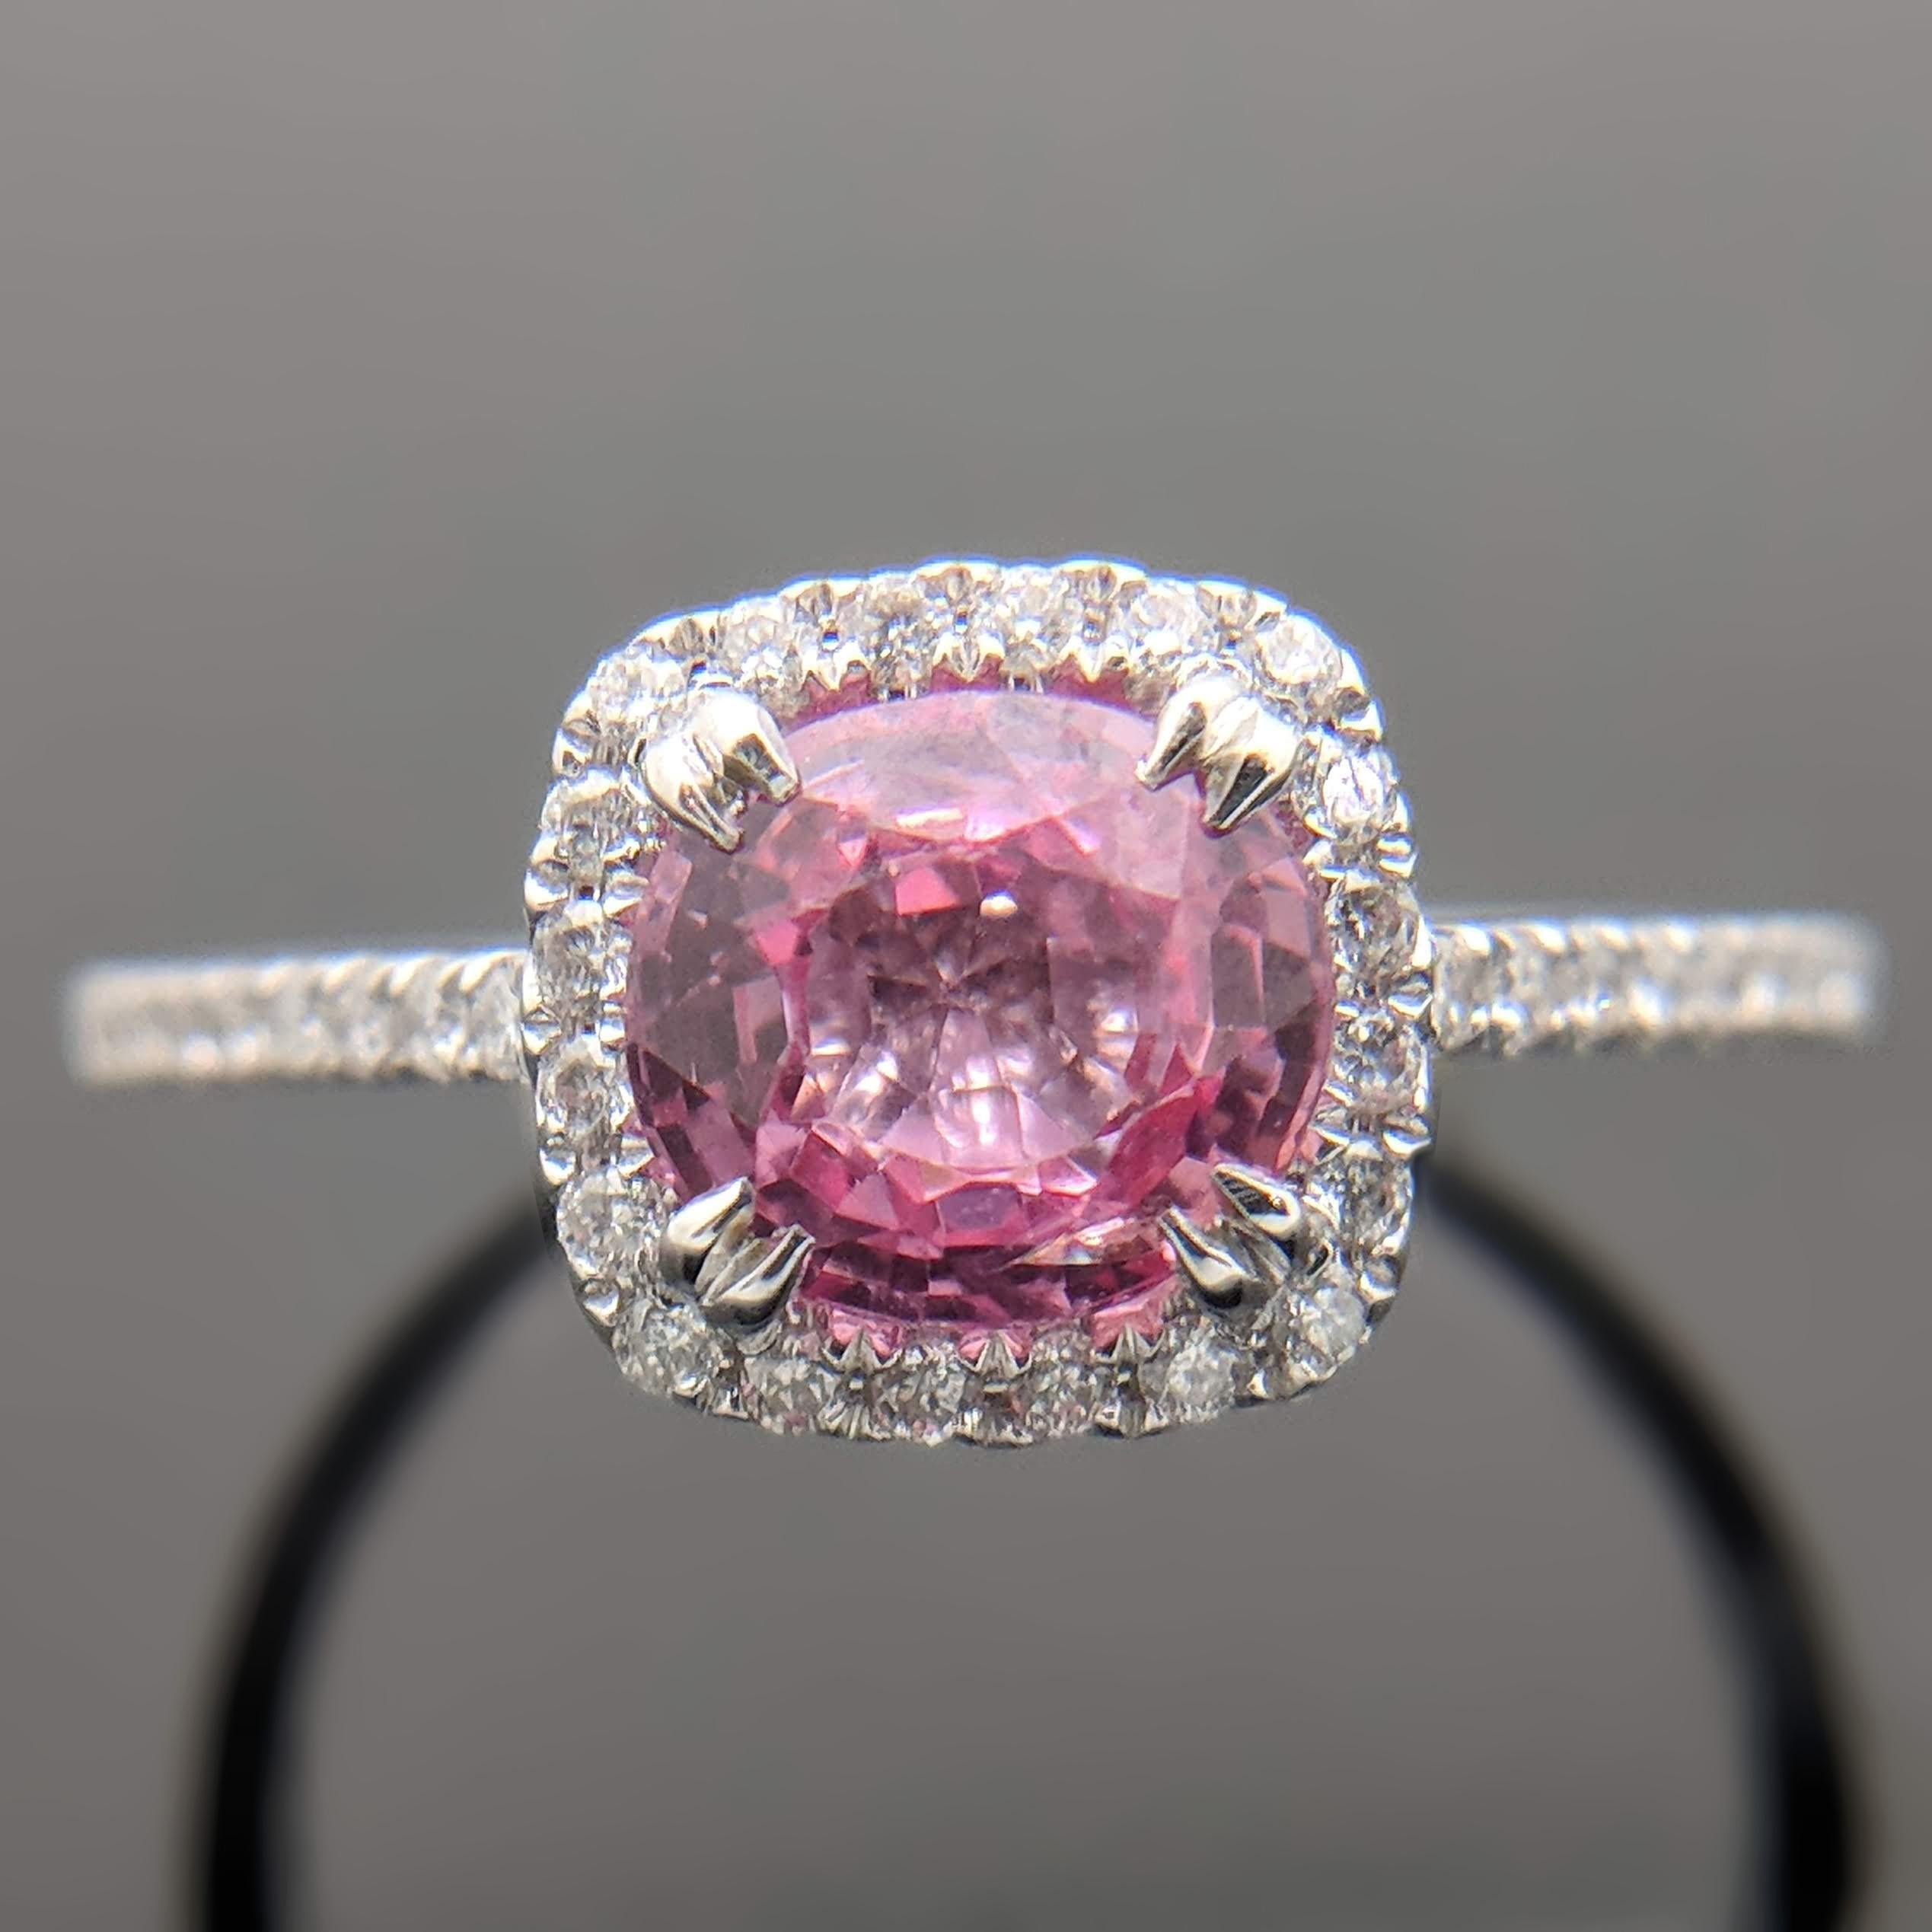 A 14kt white gold ring featuring a pink spinel estimated at 1.13ct with double prongs. The spinel is accented with a halo of diamonds as well as diamonds down the shoulders and shank with an estimated 0.18cttw. Estimated weight of gold is 1.25 gr.